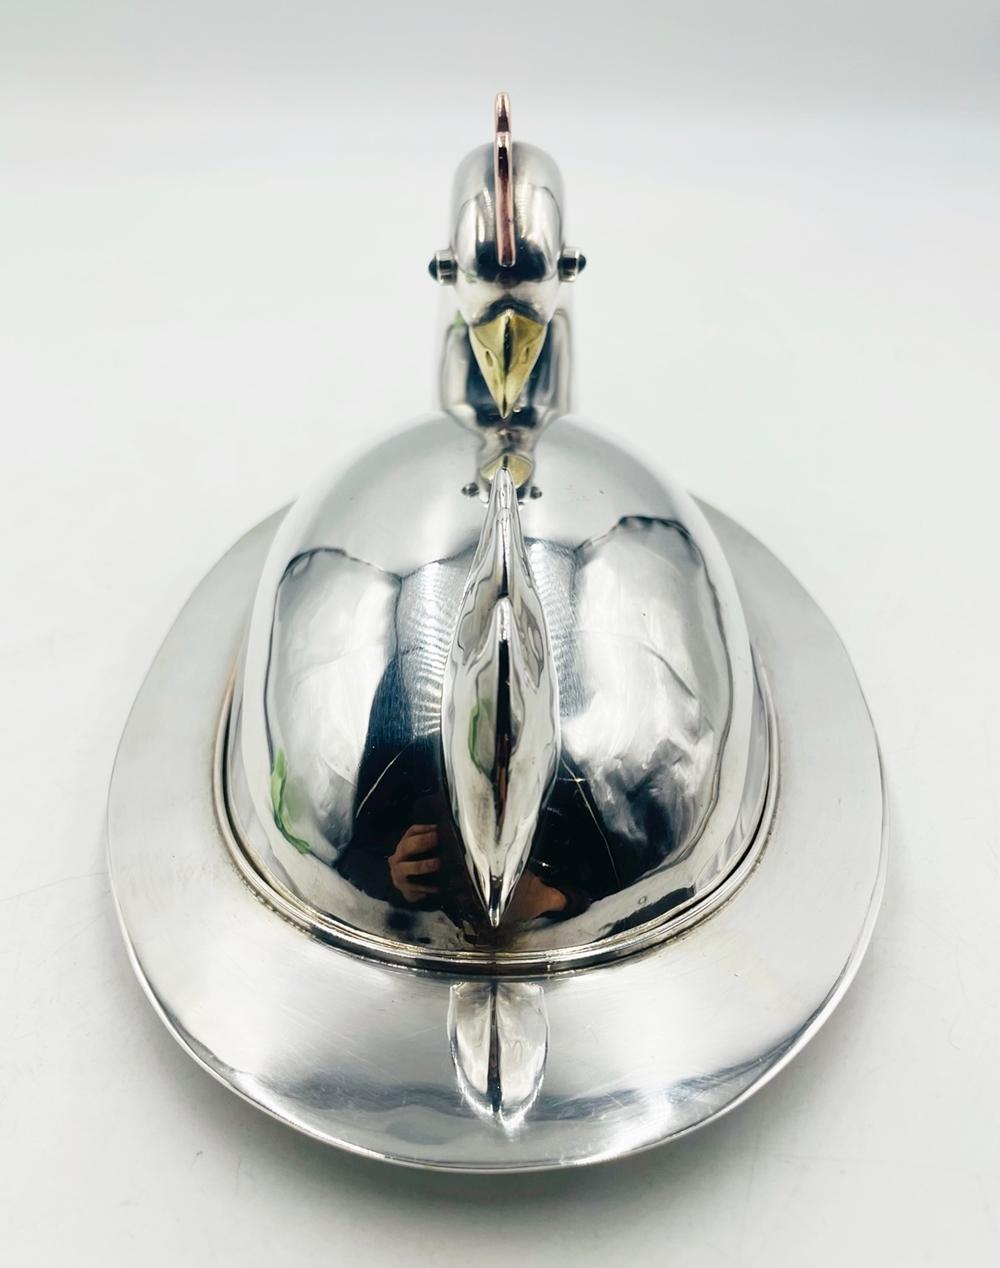 Hand-Crafted Silver Plated, Copper & Brass Butter Dish by Emilia Castillo, Mexico Modernism